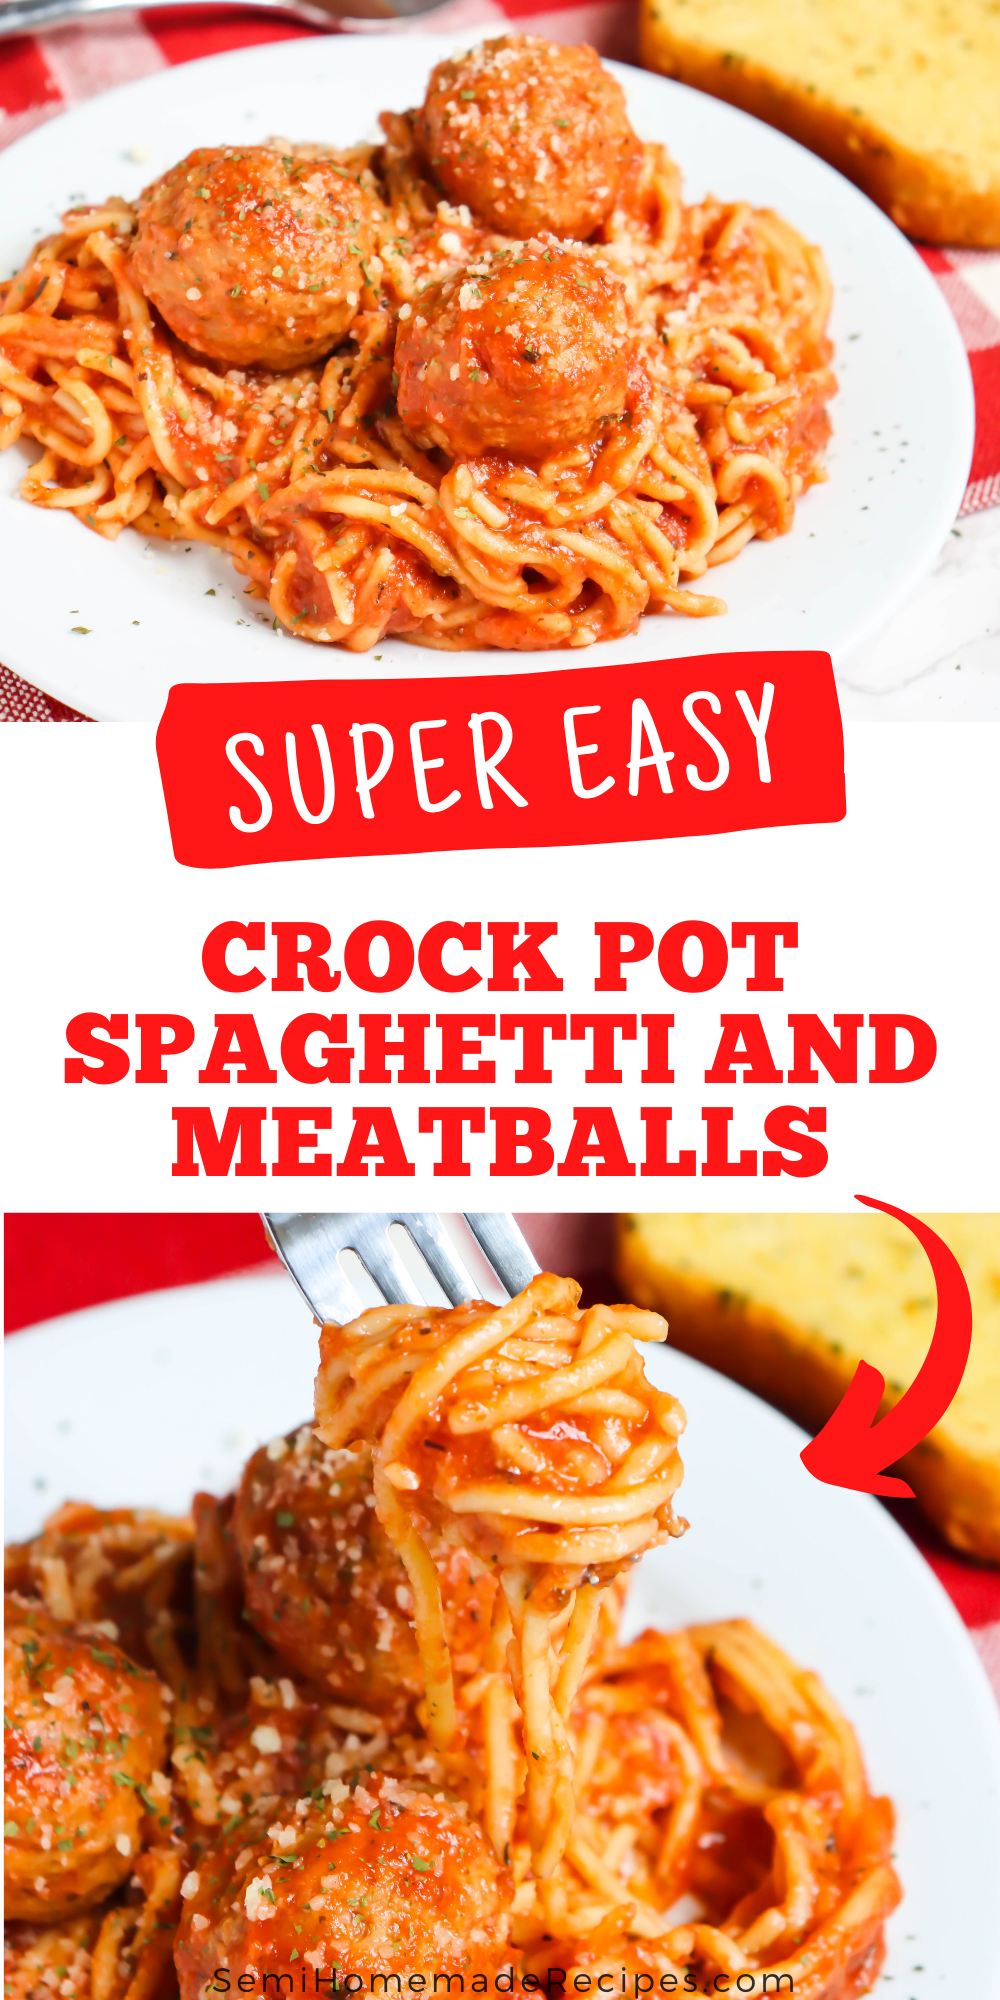 This tasty Crock Pot Spaghetti and Meatballs uses pantry and freezer items to make a fantastic meal that takes hardly any work to toss together! 